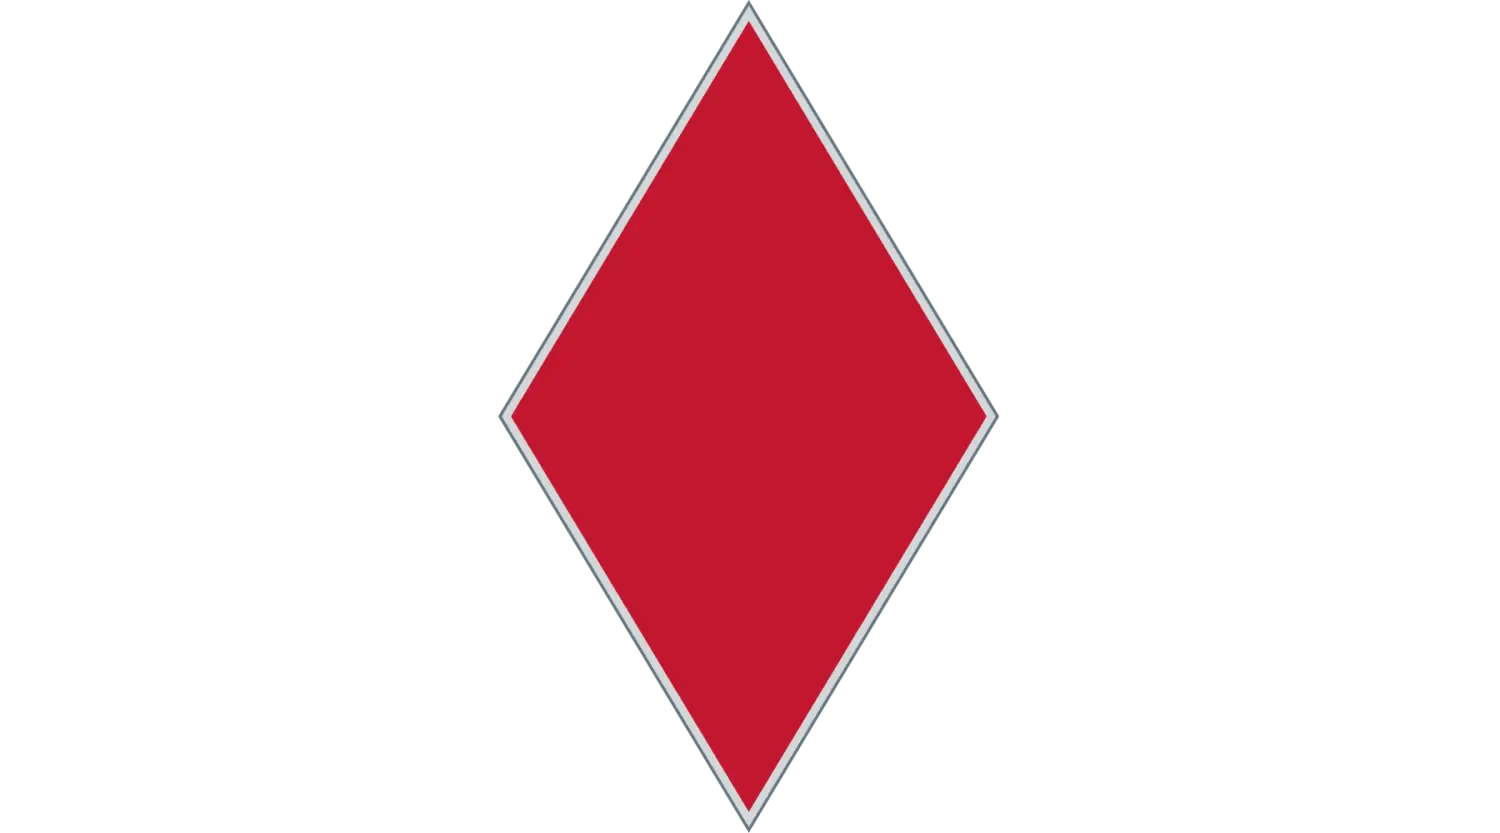 5th Infantry 'Red Diamond' Division (U.S. Army - Historical) Motto History - Tactically Acquired